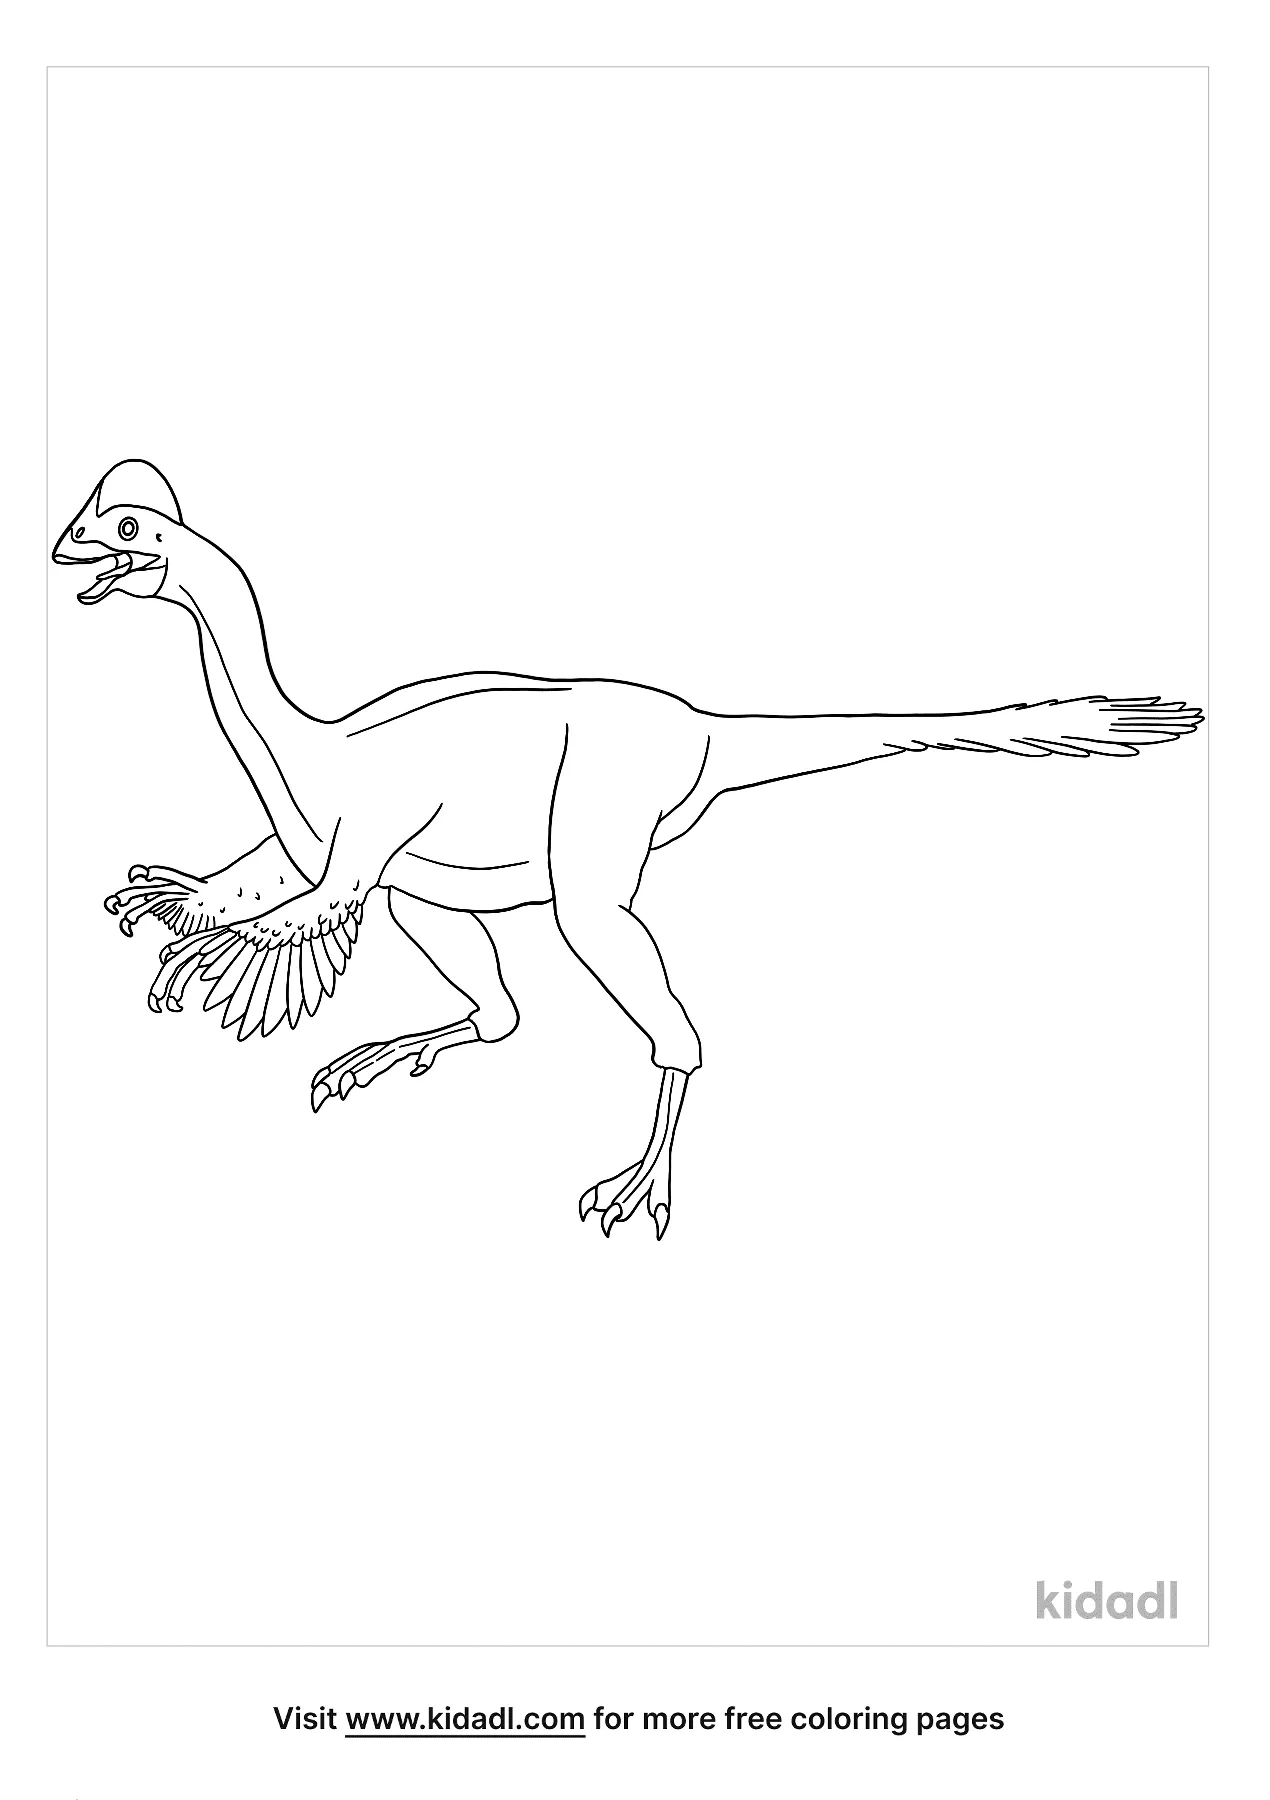 Feathered Dinosaur Coloring Page